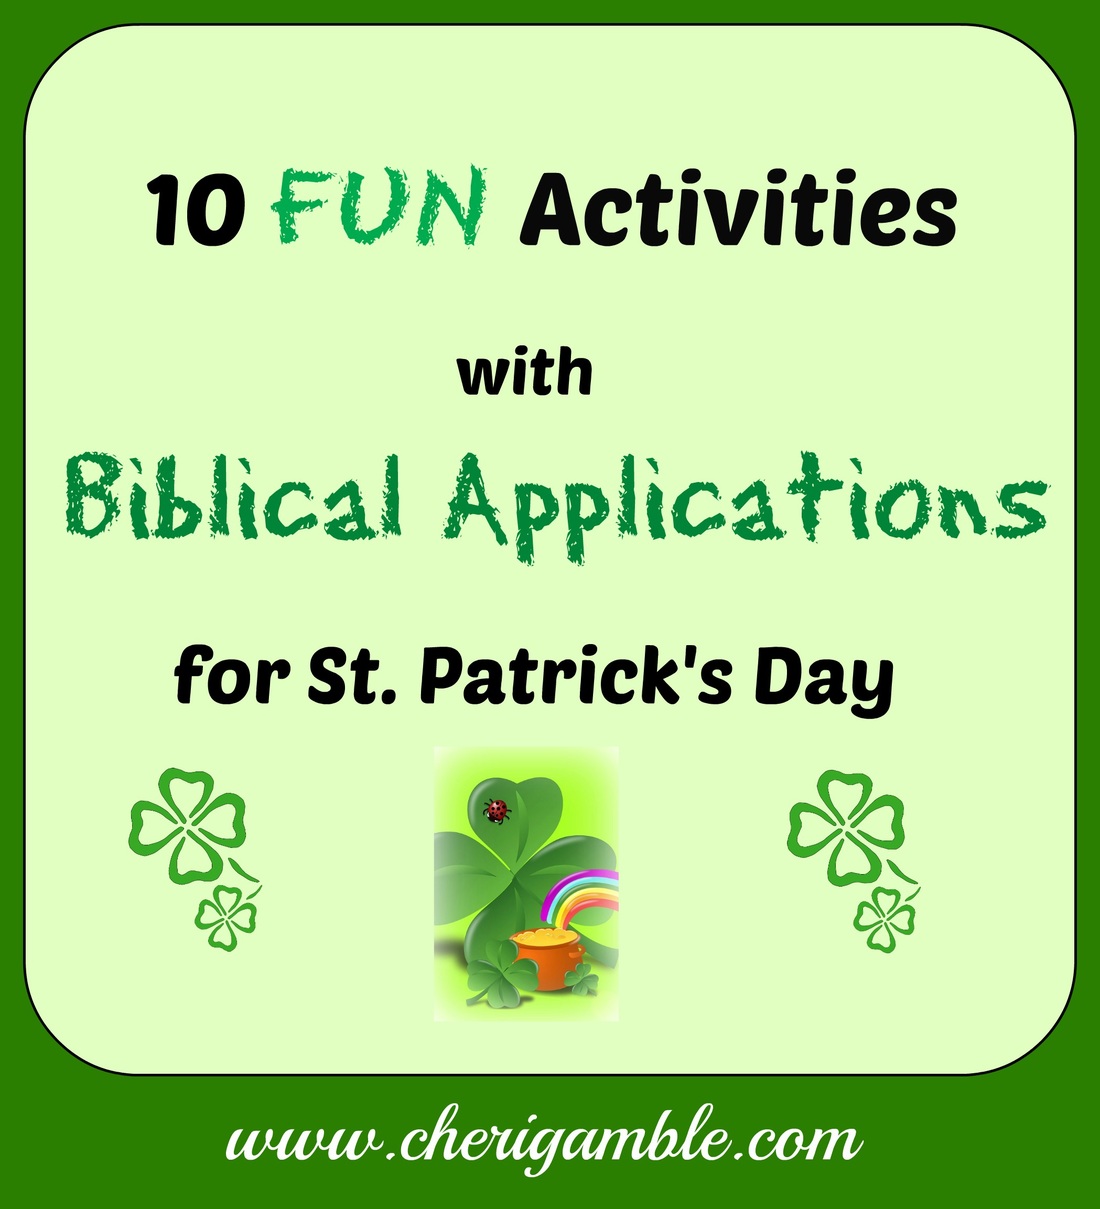 10 Fun Activities with Biblical Applications for St. Patrick’s Day at CheriGamble.com